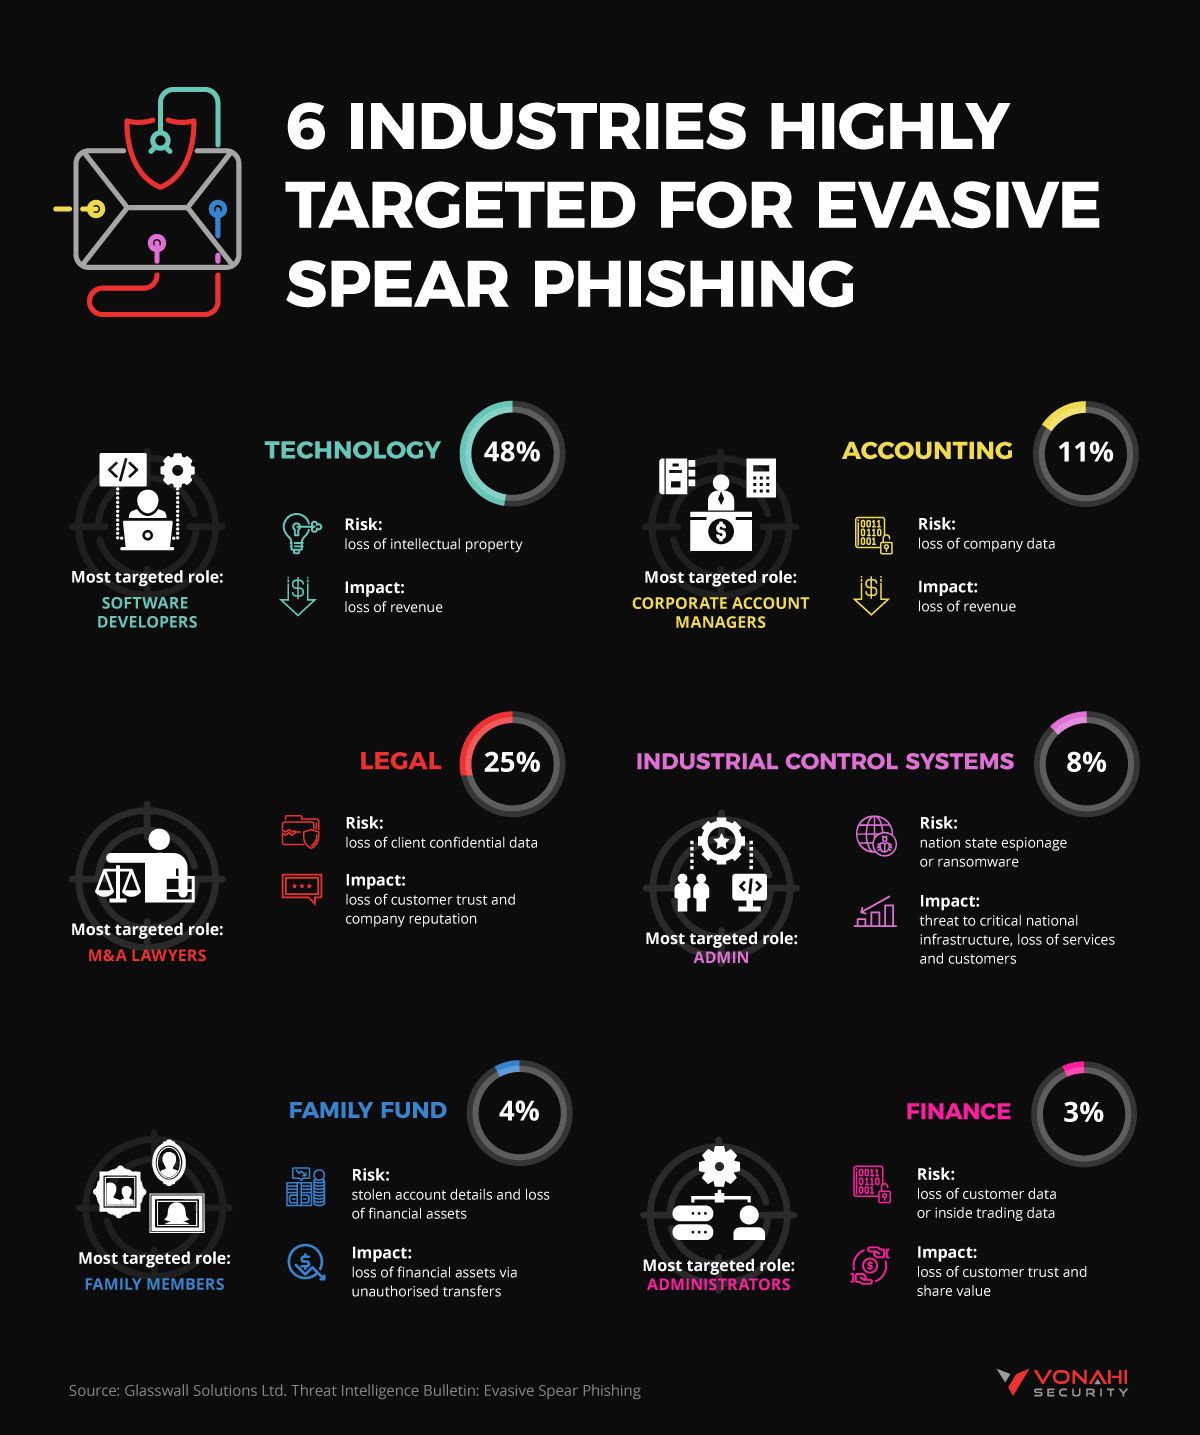 Social Engineering 2.0 - Evasive Spear Phishing and Vendor Email Compromise